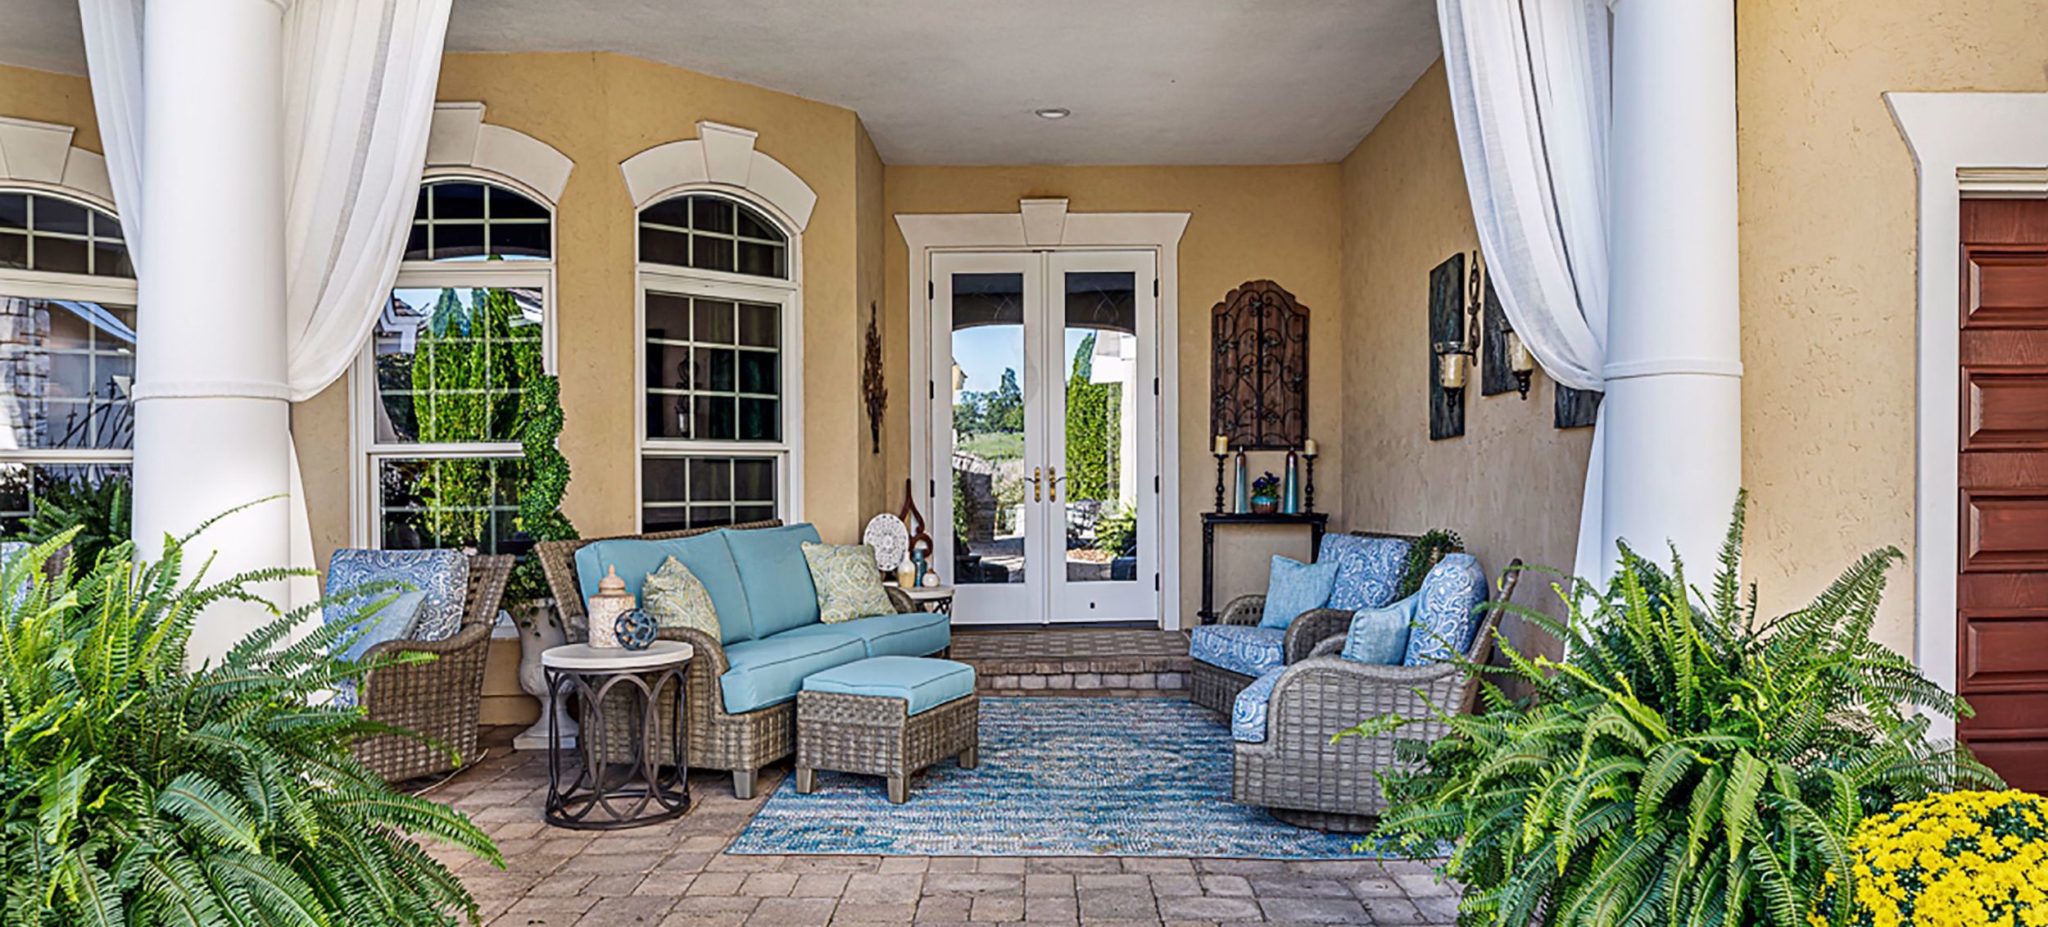 How to Decorate Your Porch For Spring